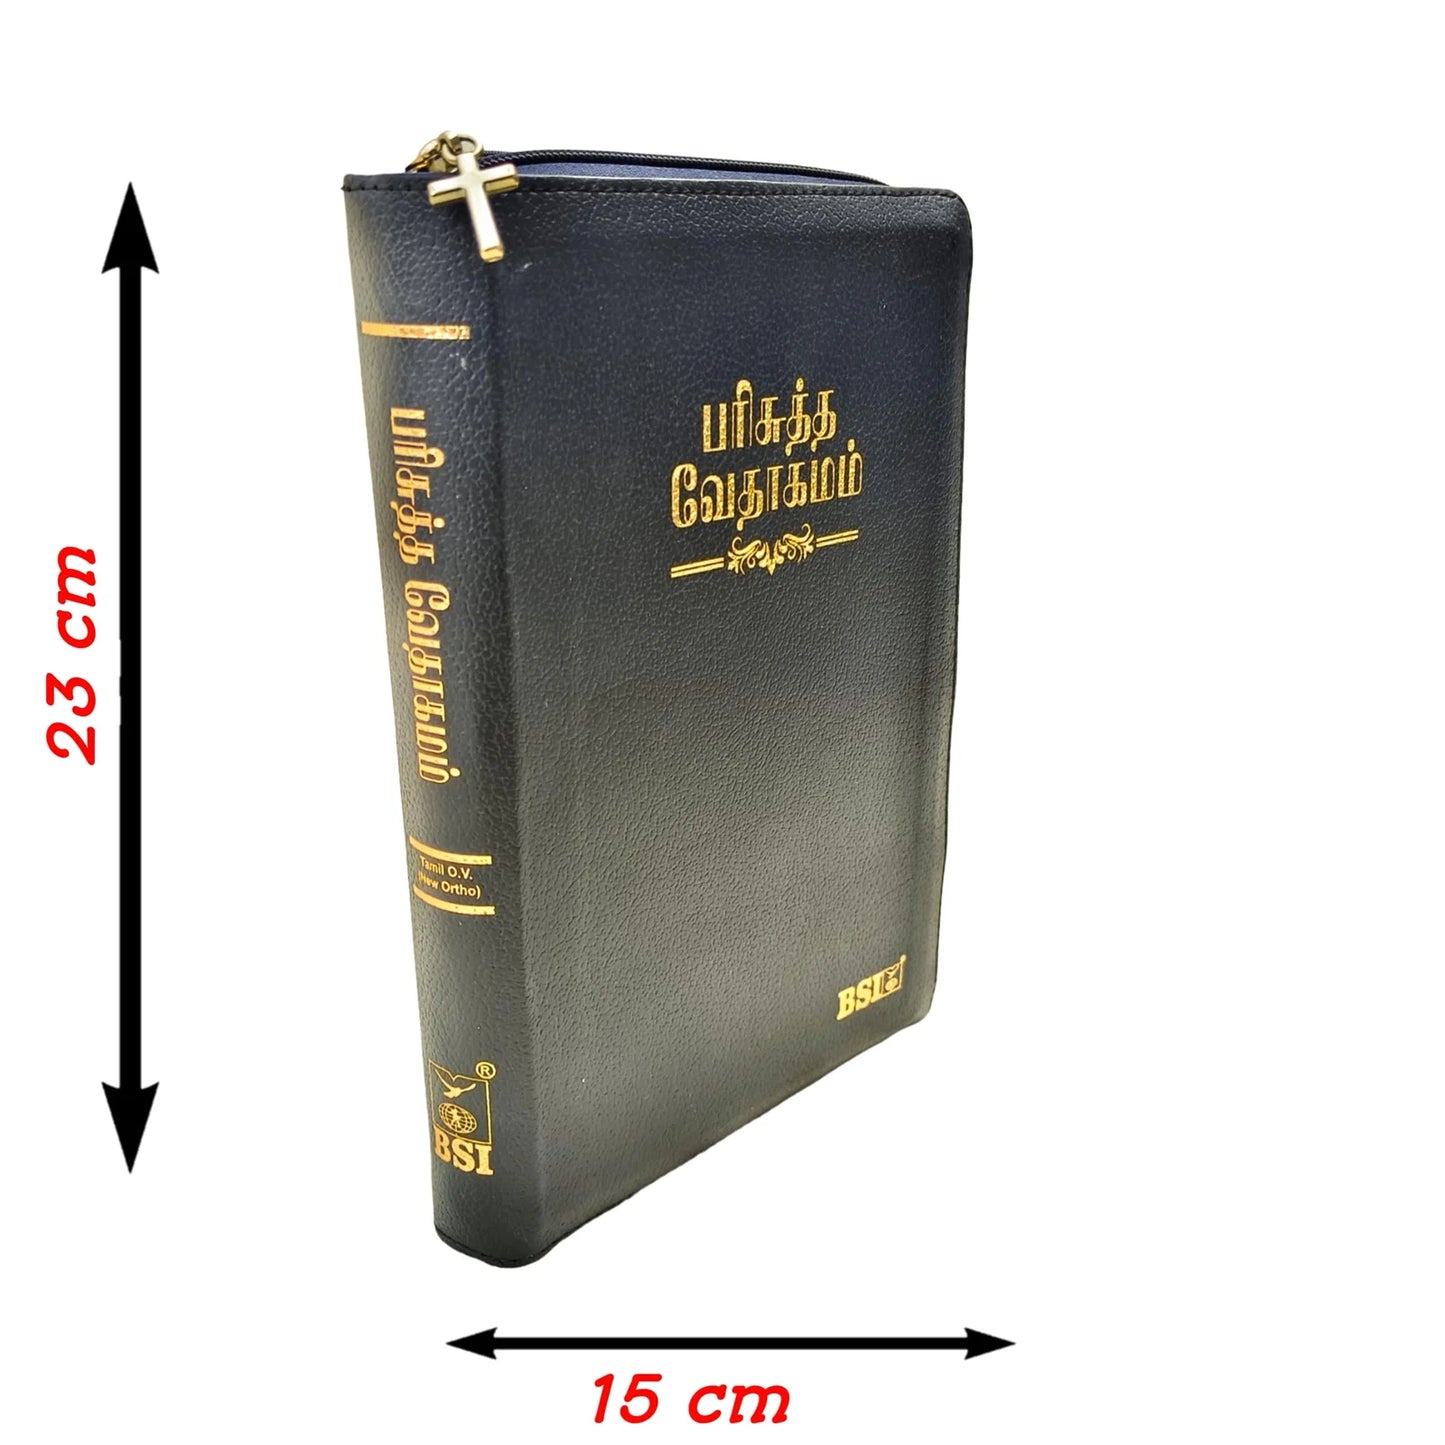 The Holy Bible In Tamil |Black Color Bound |With Index and Cross Zip Bible